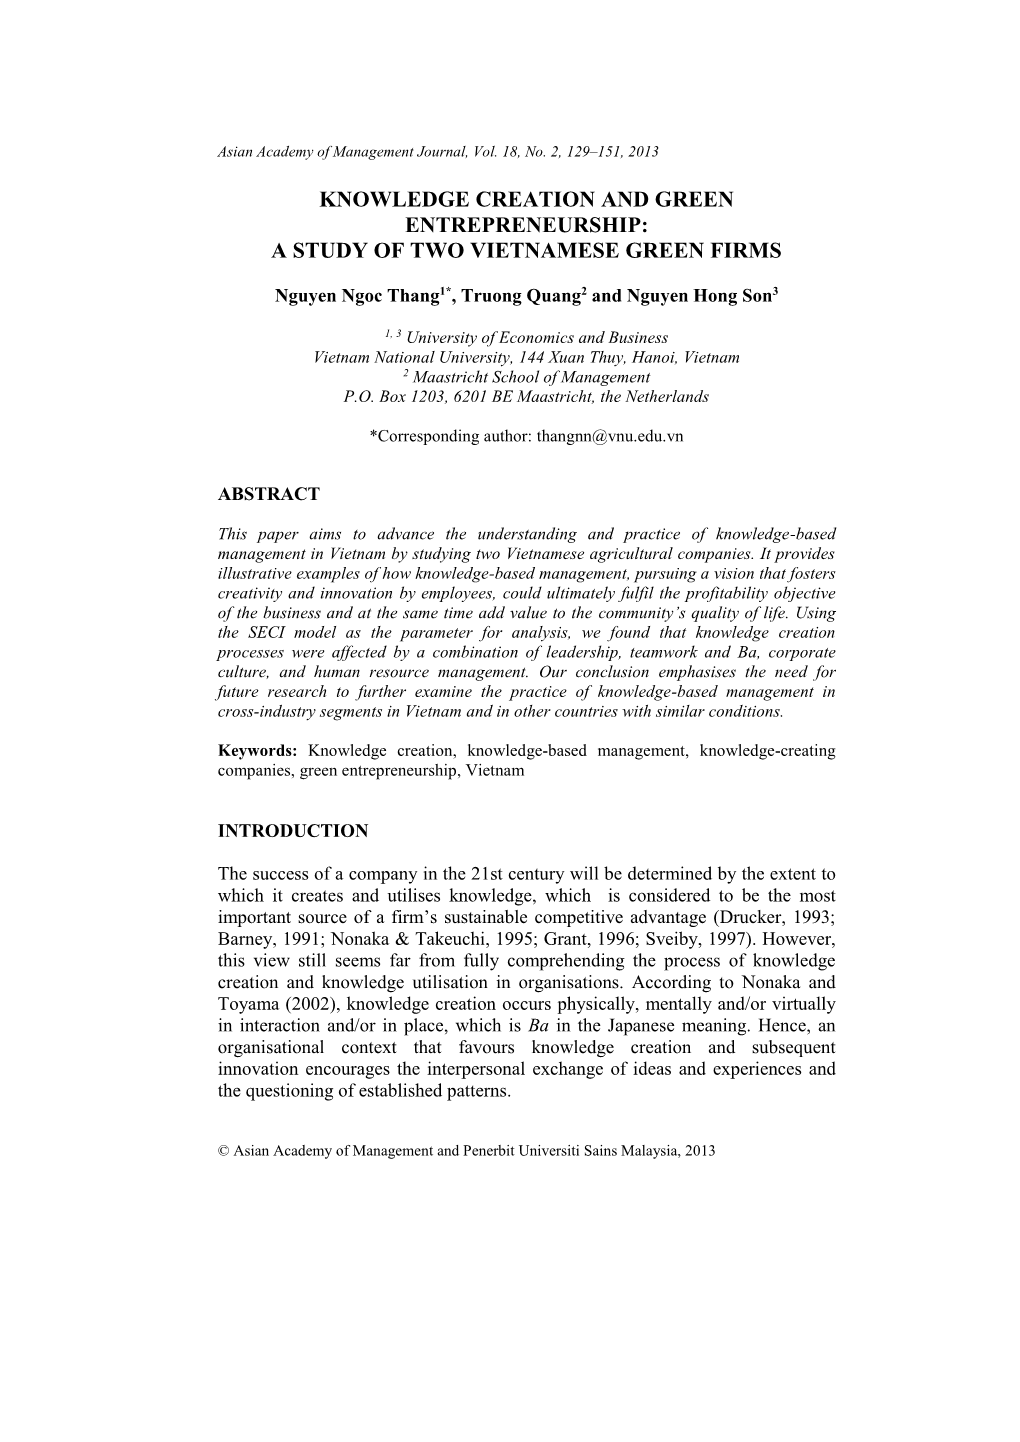 Knowledge Creation and Green Entrepreneurship: a Study of Two Vietnamese Green Firms